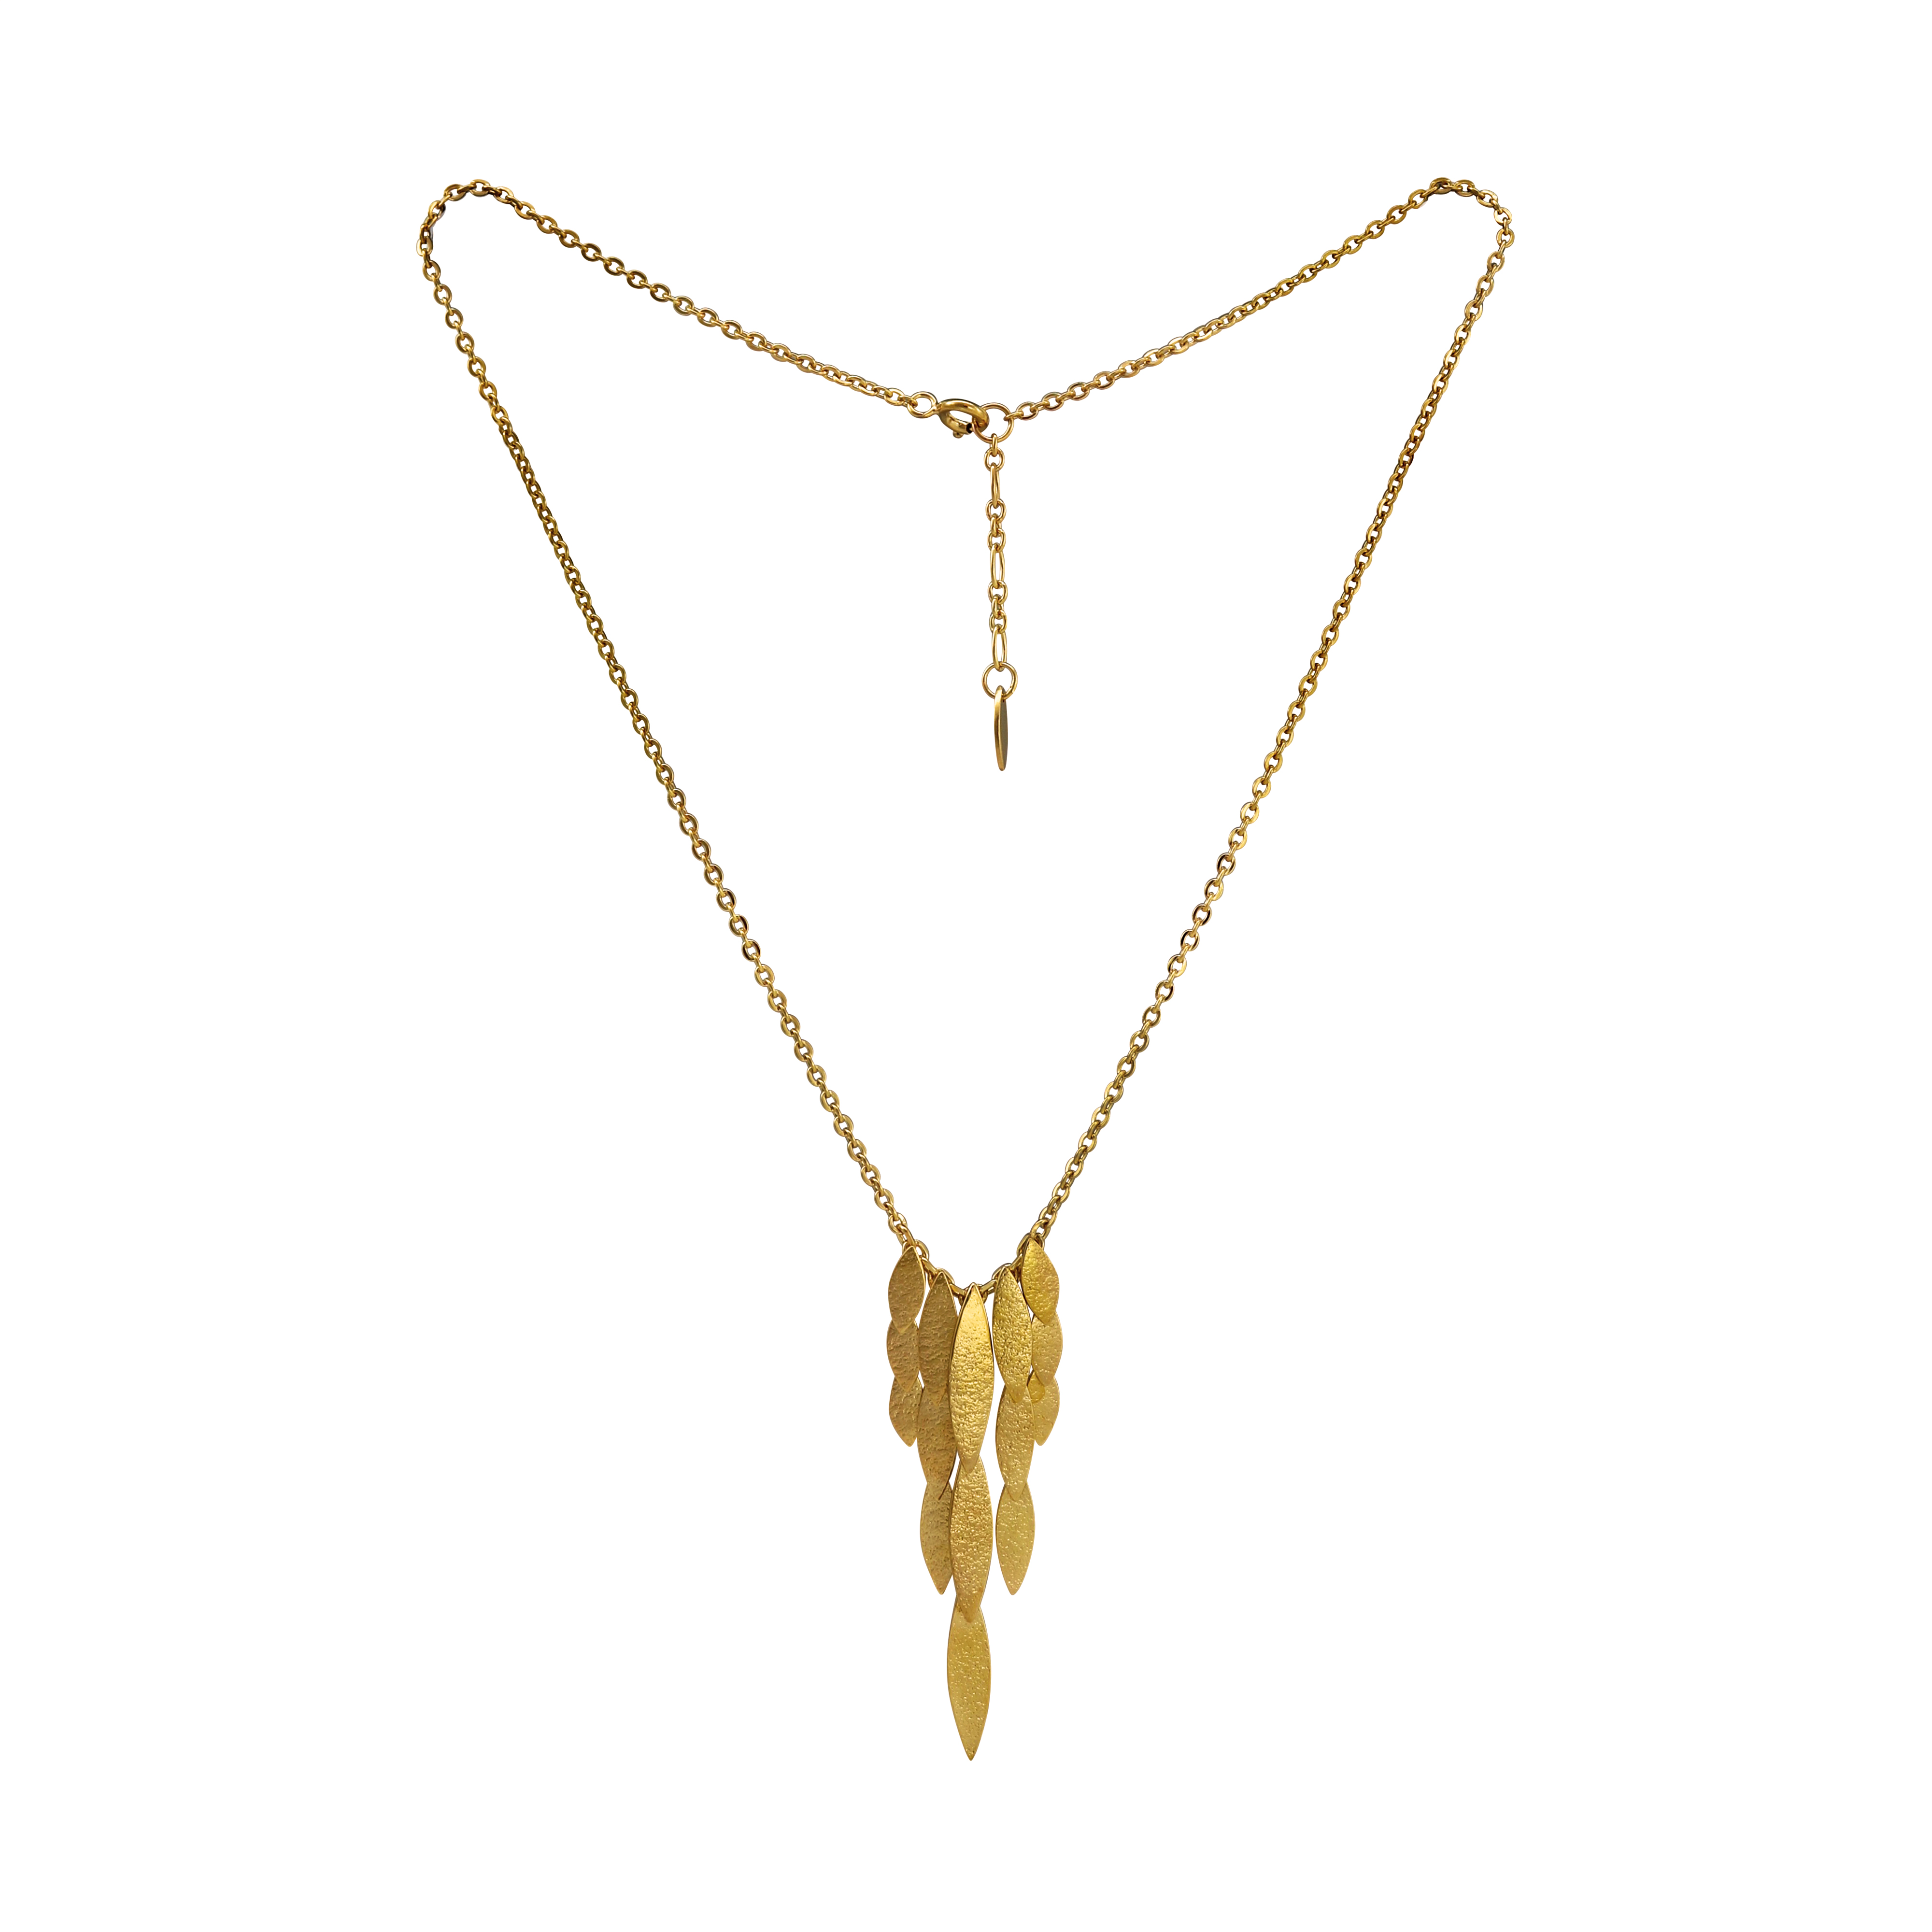 Icarus Waterfall Necklace Gold Vermeil | Necklaces / Pendants by Cara ...